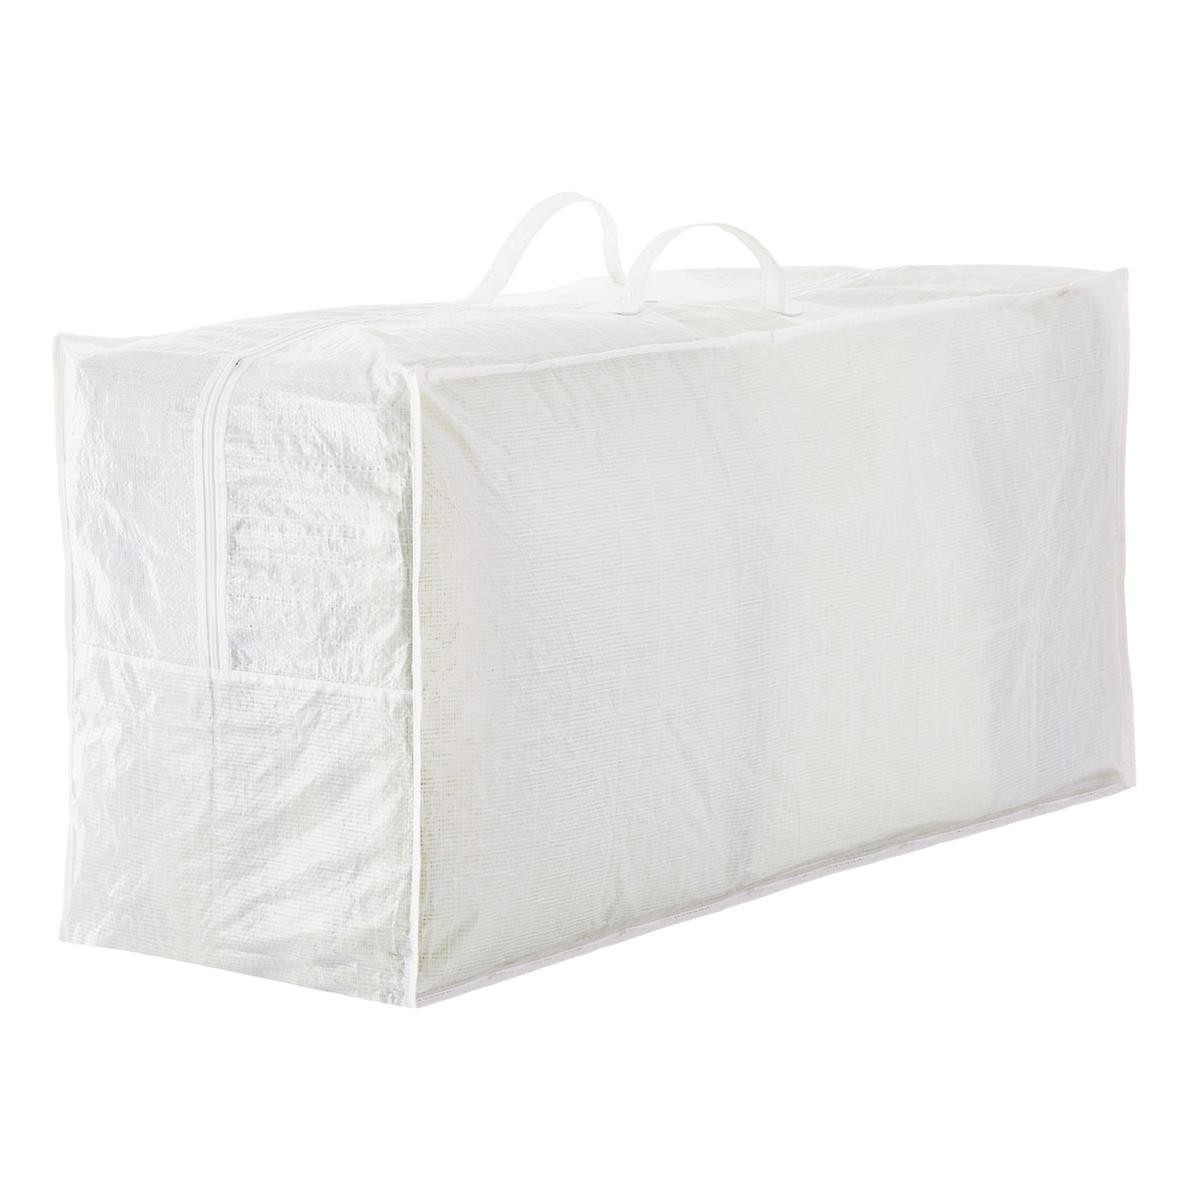 Outdoor cushion storage bag the container store